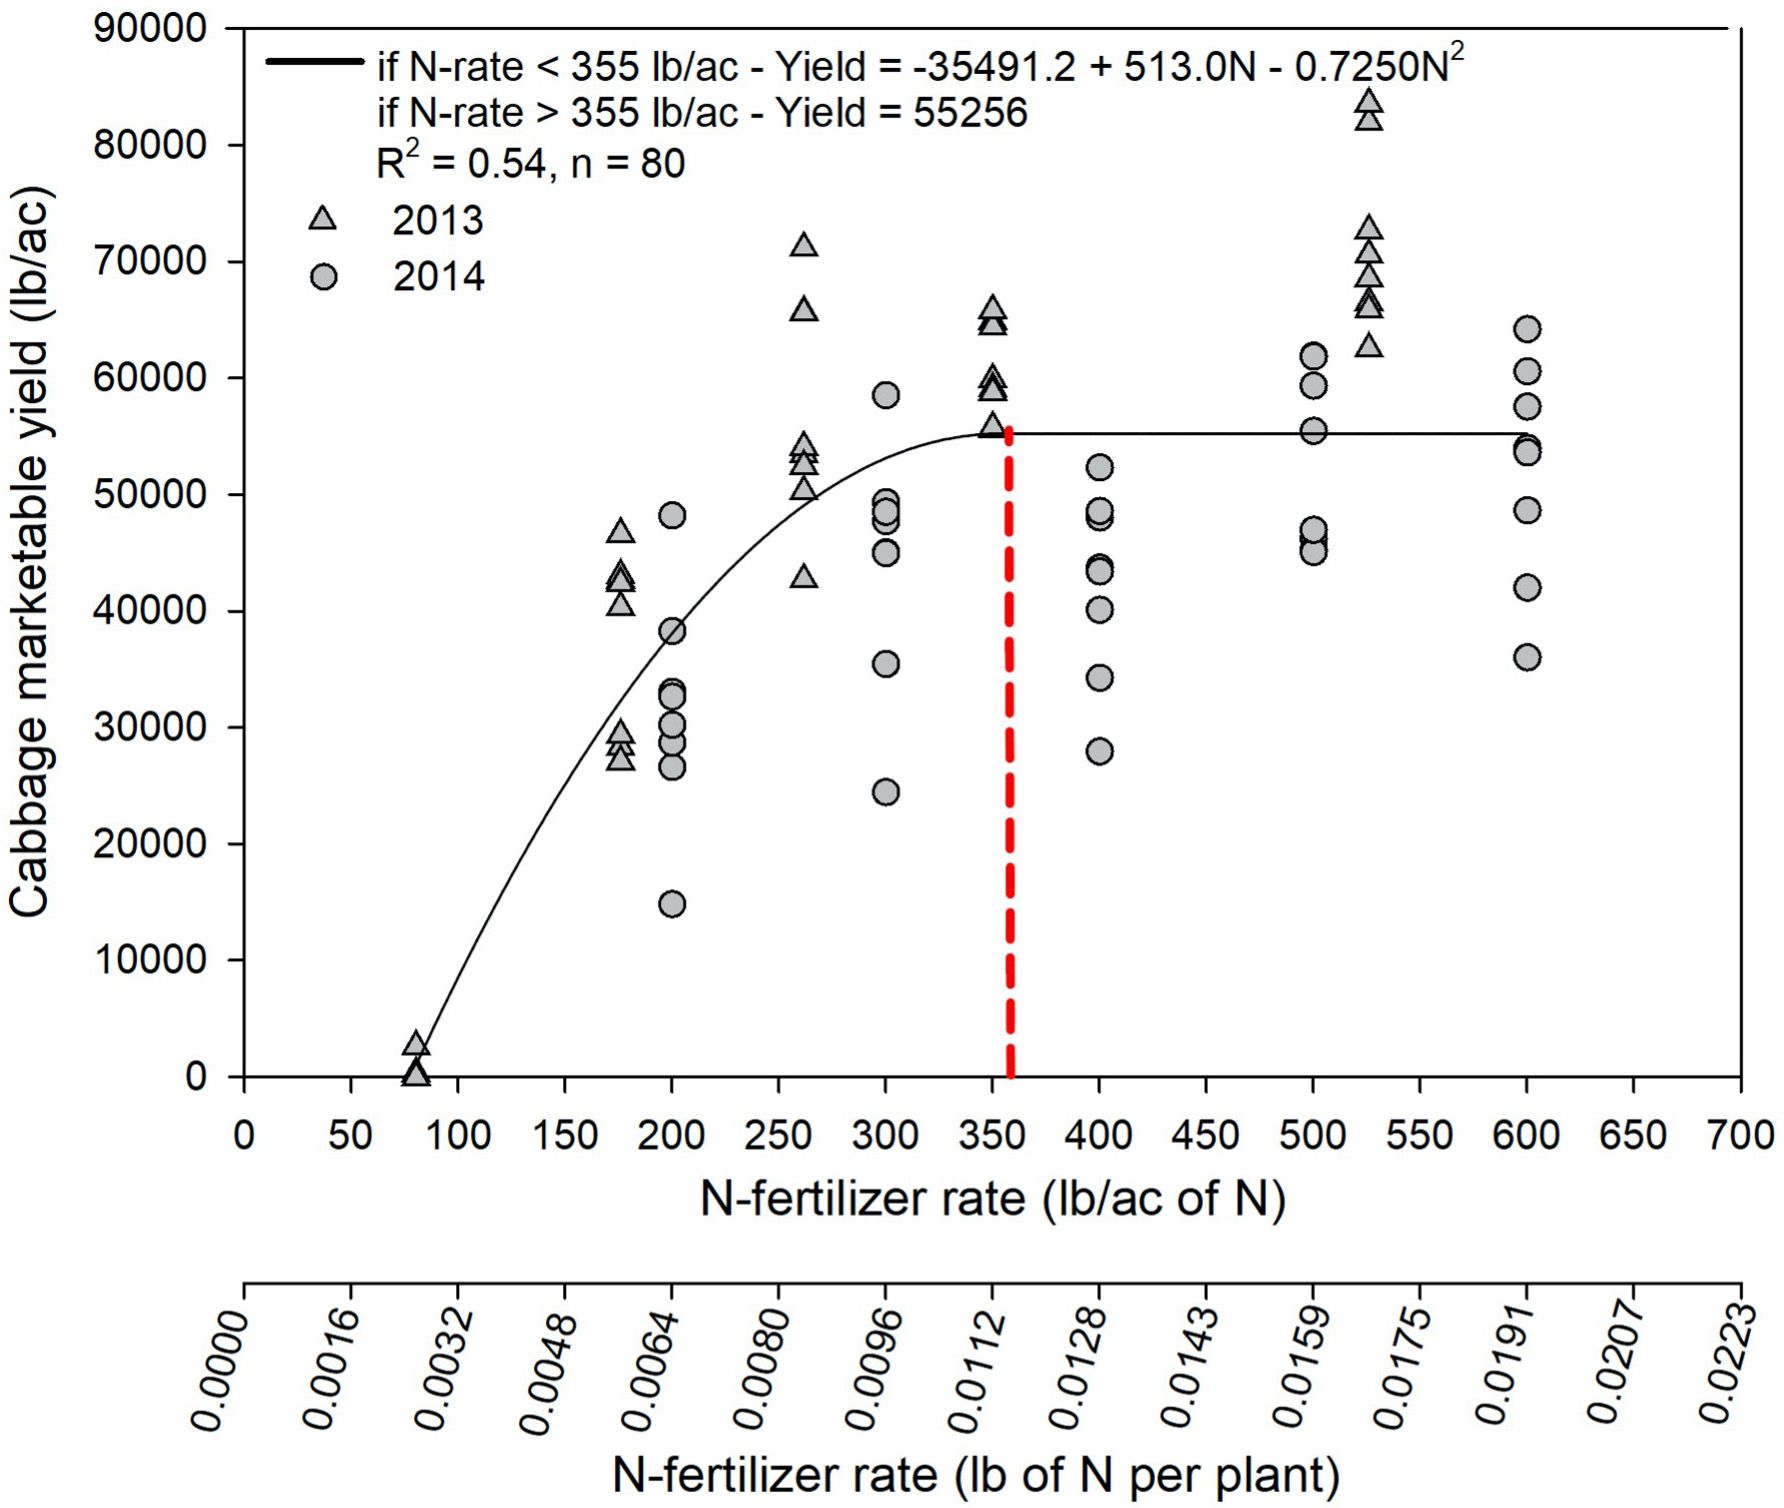 Cabbage marketable yield response to N-fertilizer rates (N-fertilizer rates expressed in lb/acre and lb/plant adjusted by plant population) for cultivar ‘Bravo’ grown on plastic mulch with a plant population of 31,363 plants/acre in Hastings, FL in 2013 and 2014. The red dotted line indicates maximum marketable yield estimated by setting the first derivative of the quadratic equation generated by the regression analysis equal to zero. The total number of observations = 80. 